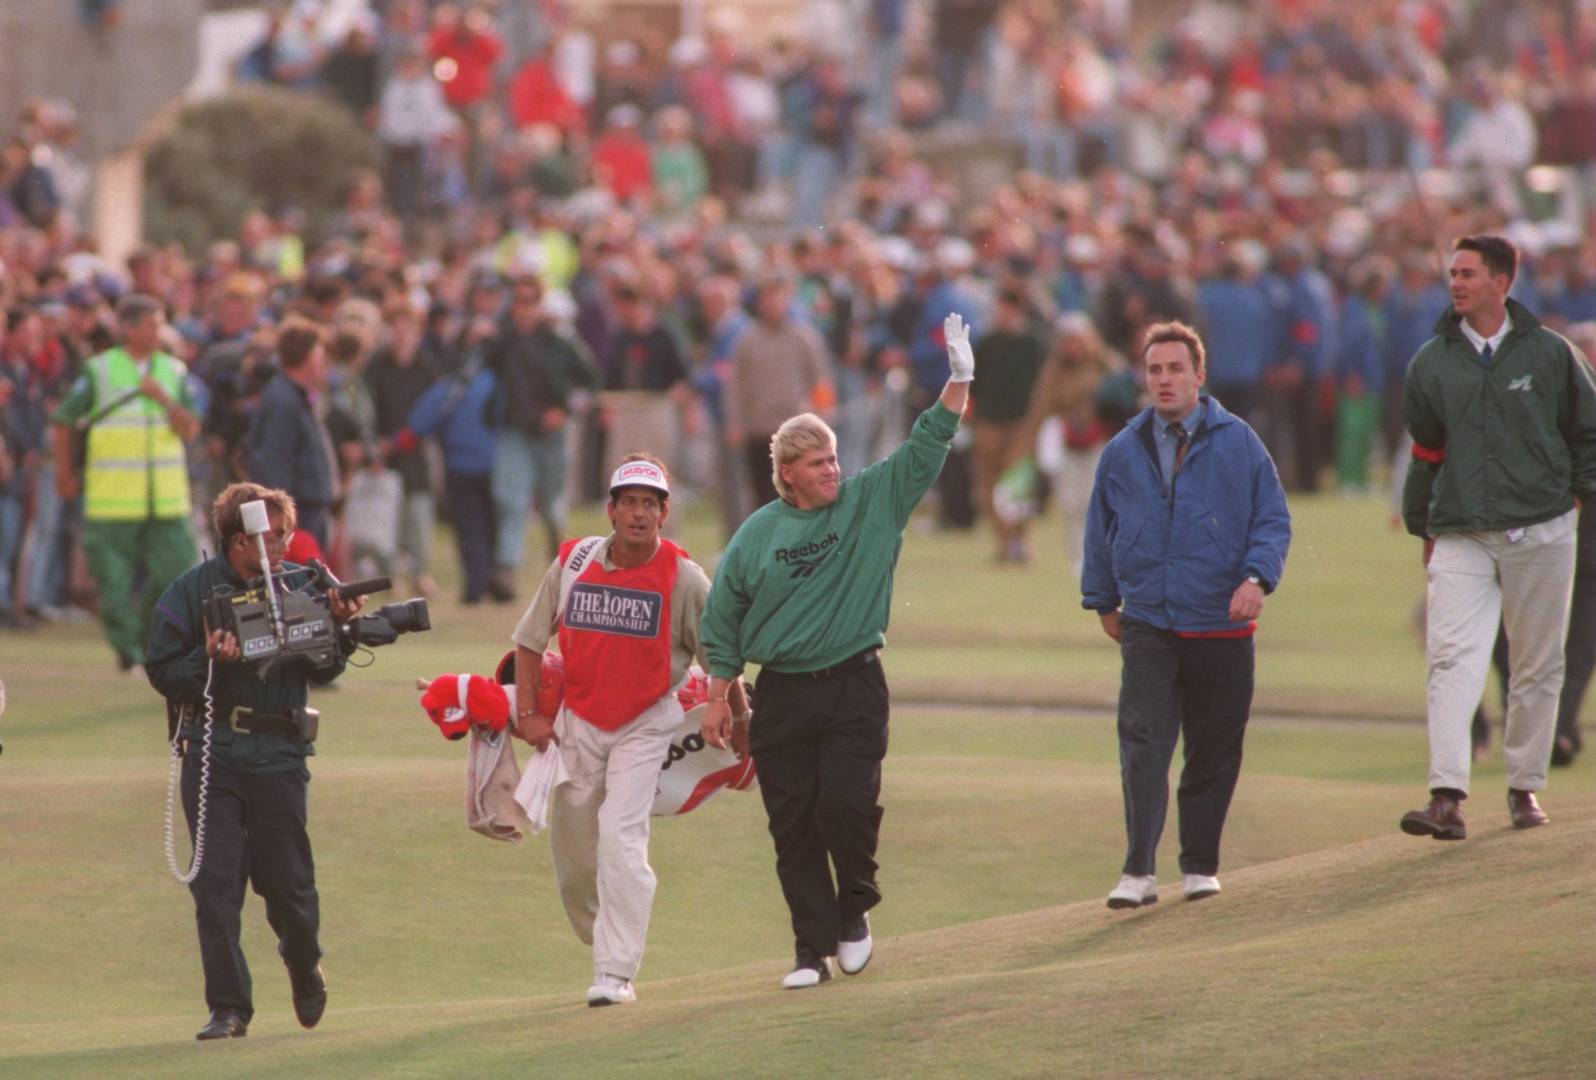 John Daly wins The 124th Open beating Costantino Rocca in a play-off, 1995